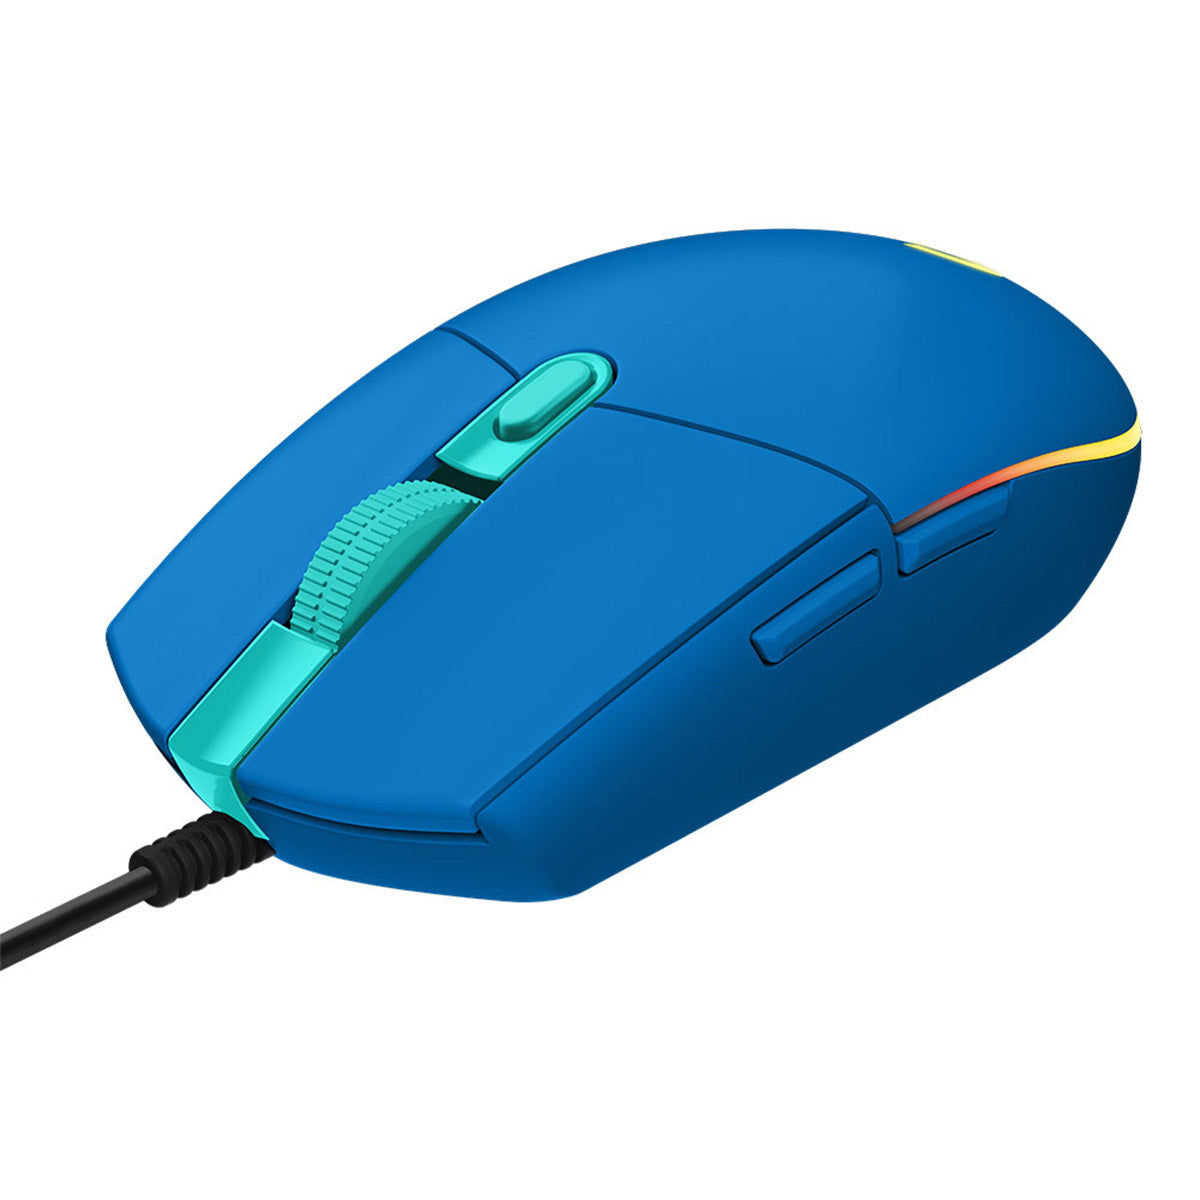 Logitech G203 Mouse: How to Change DPI Settings 